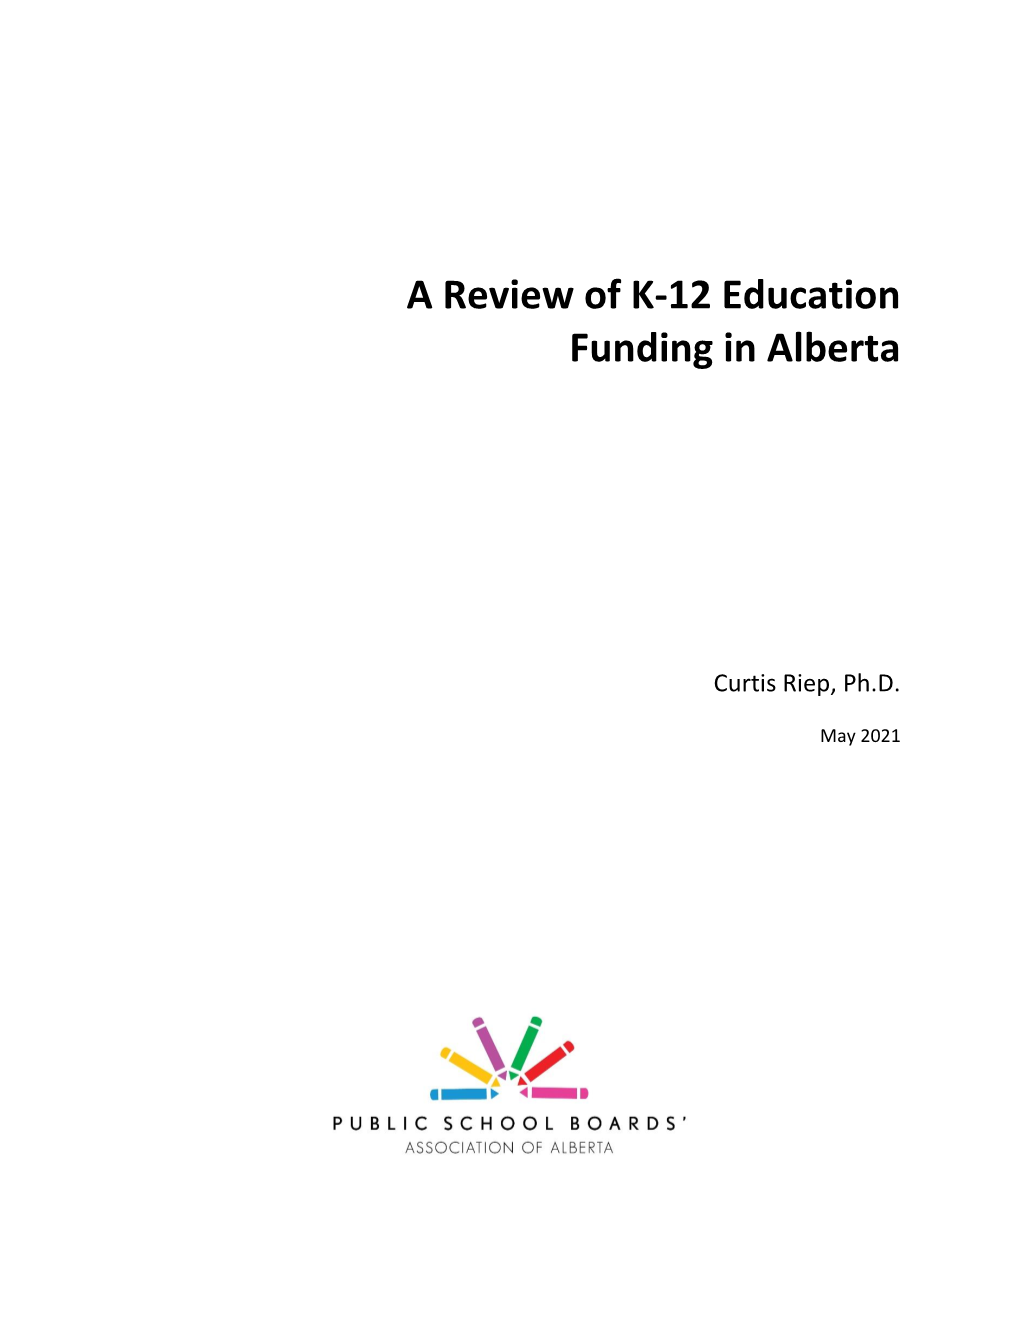 A Review of K-12 Education Funding in Alberta